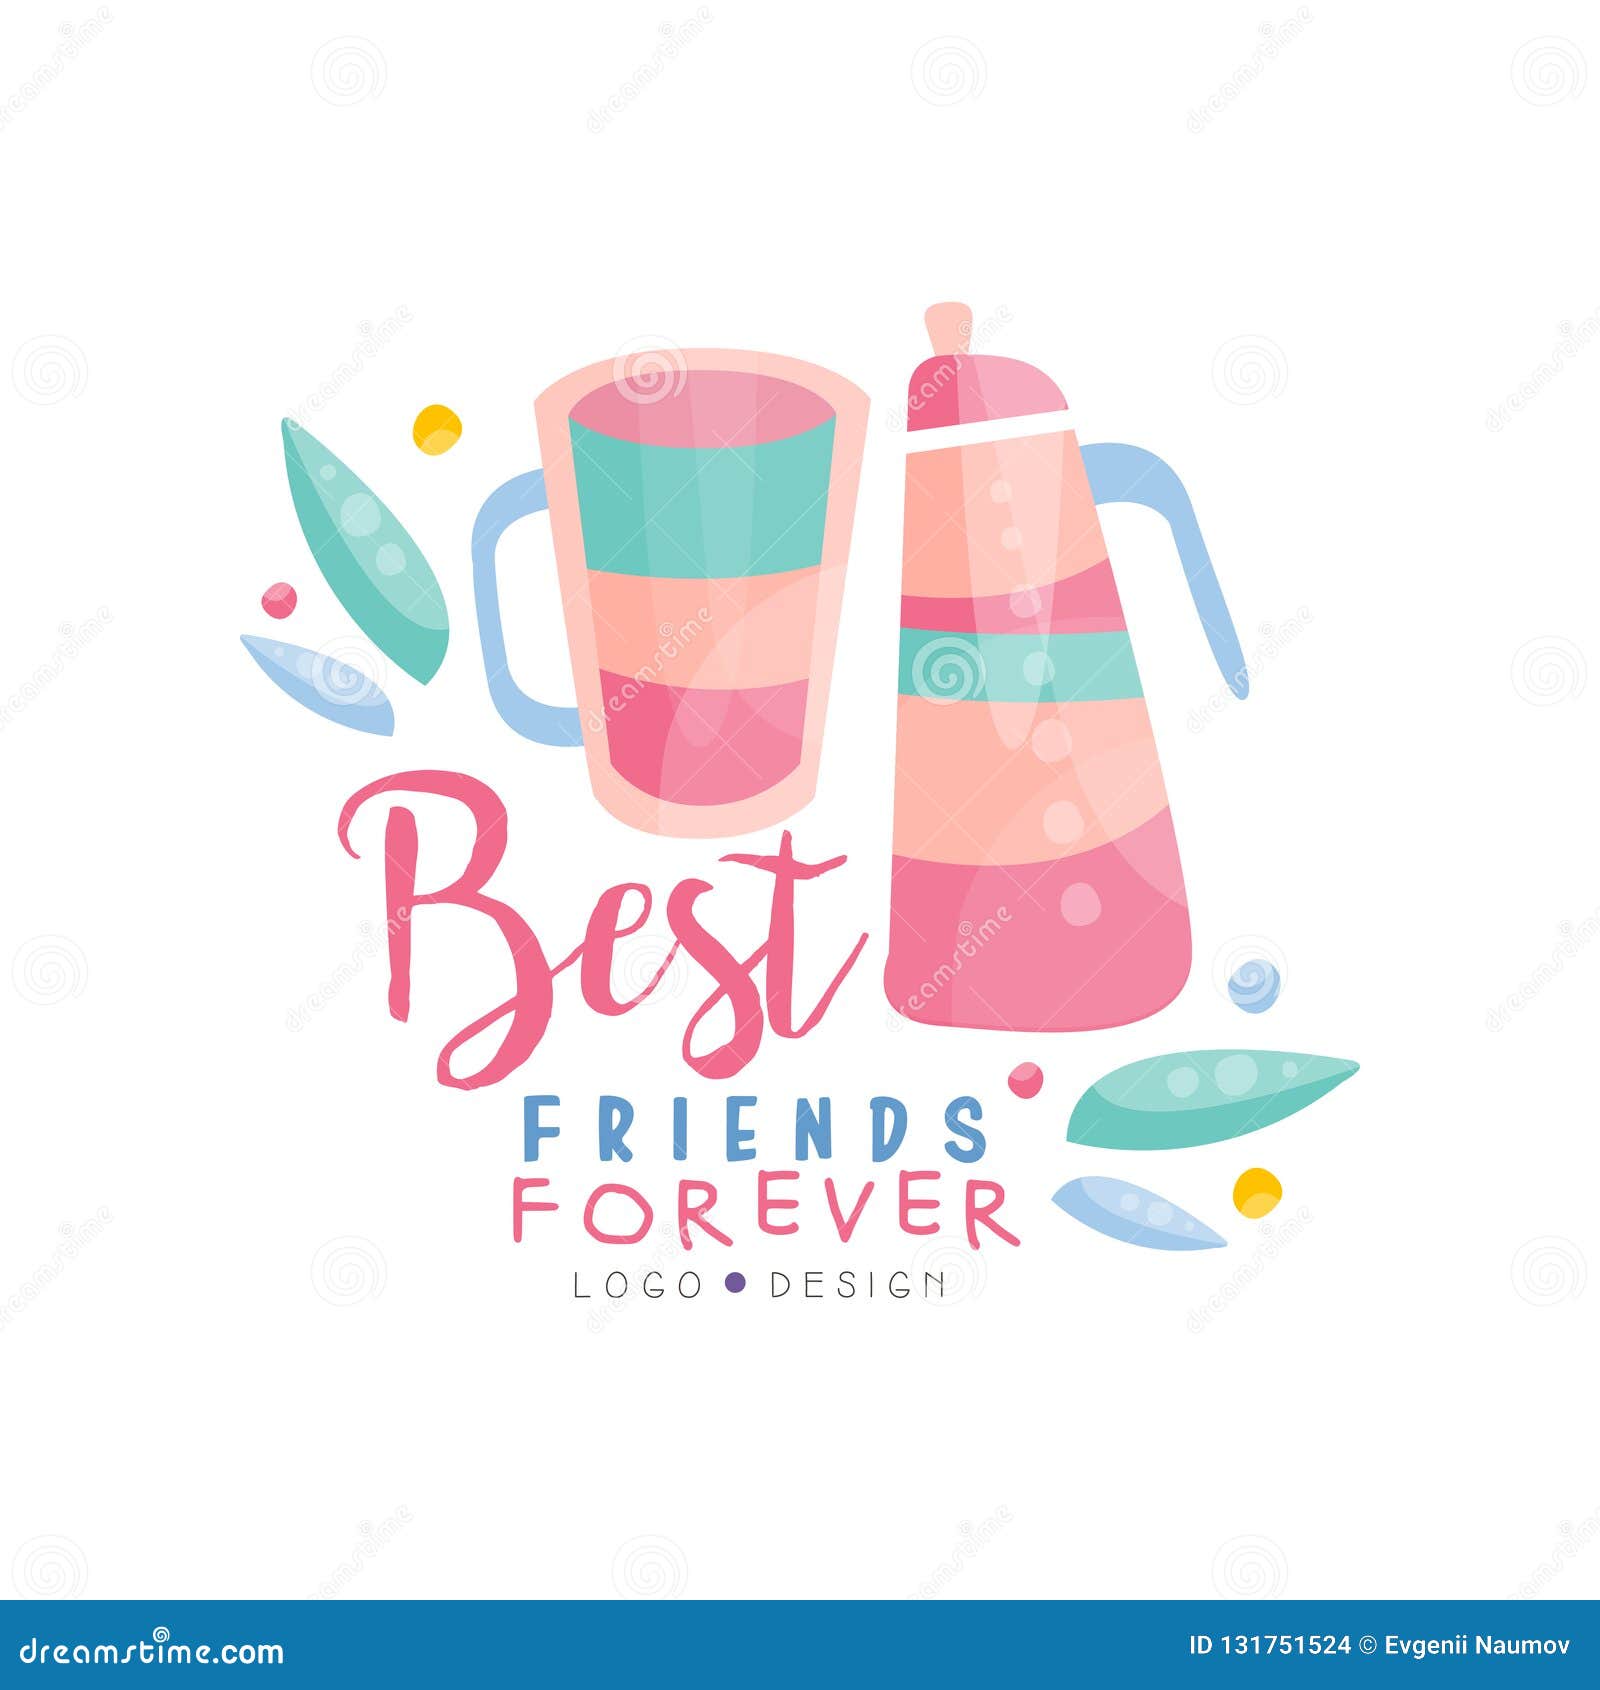 Best Friends Forever Graphic by graphic point · Creative Fabrica